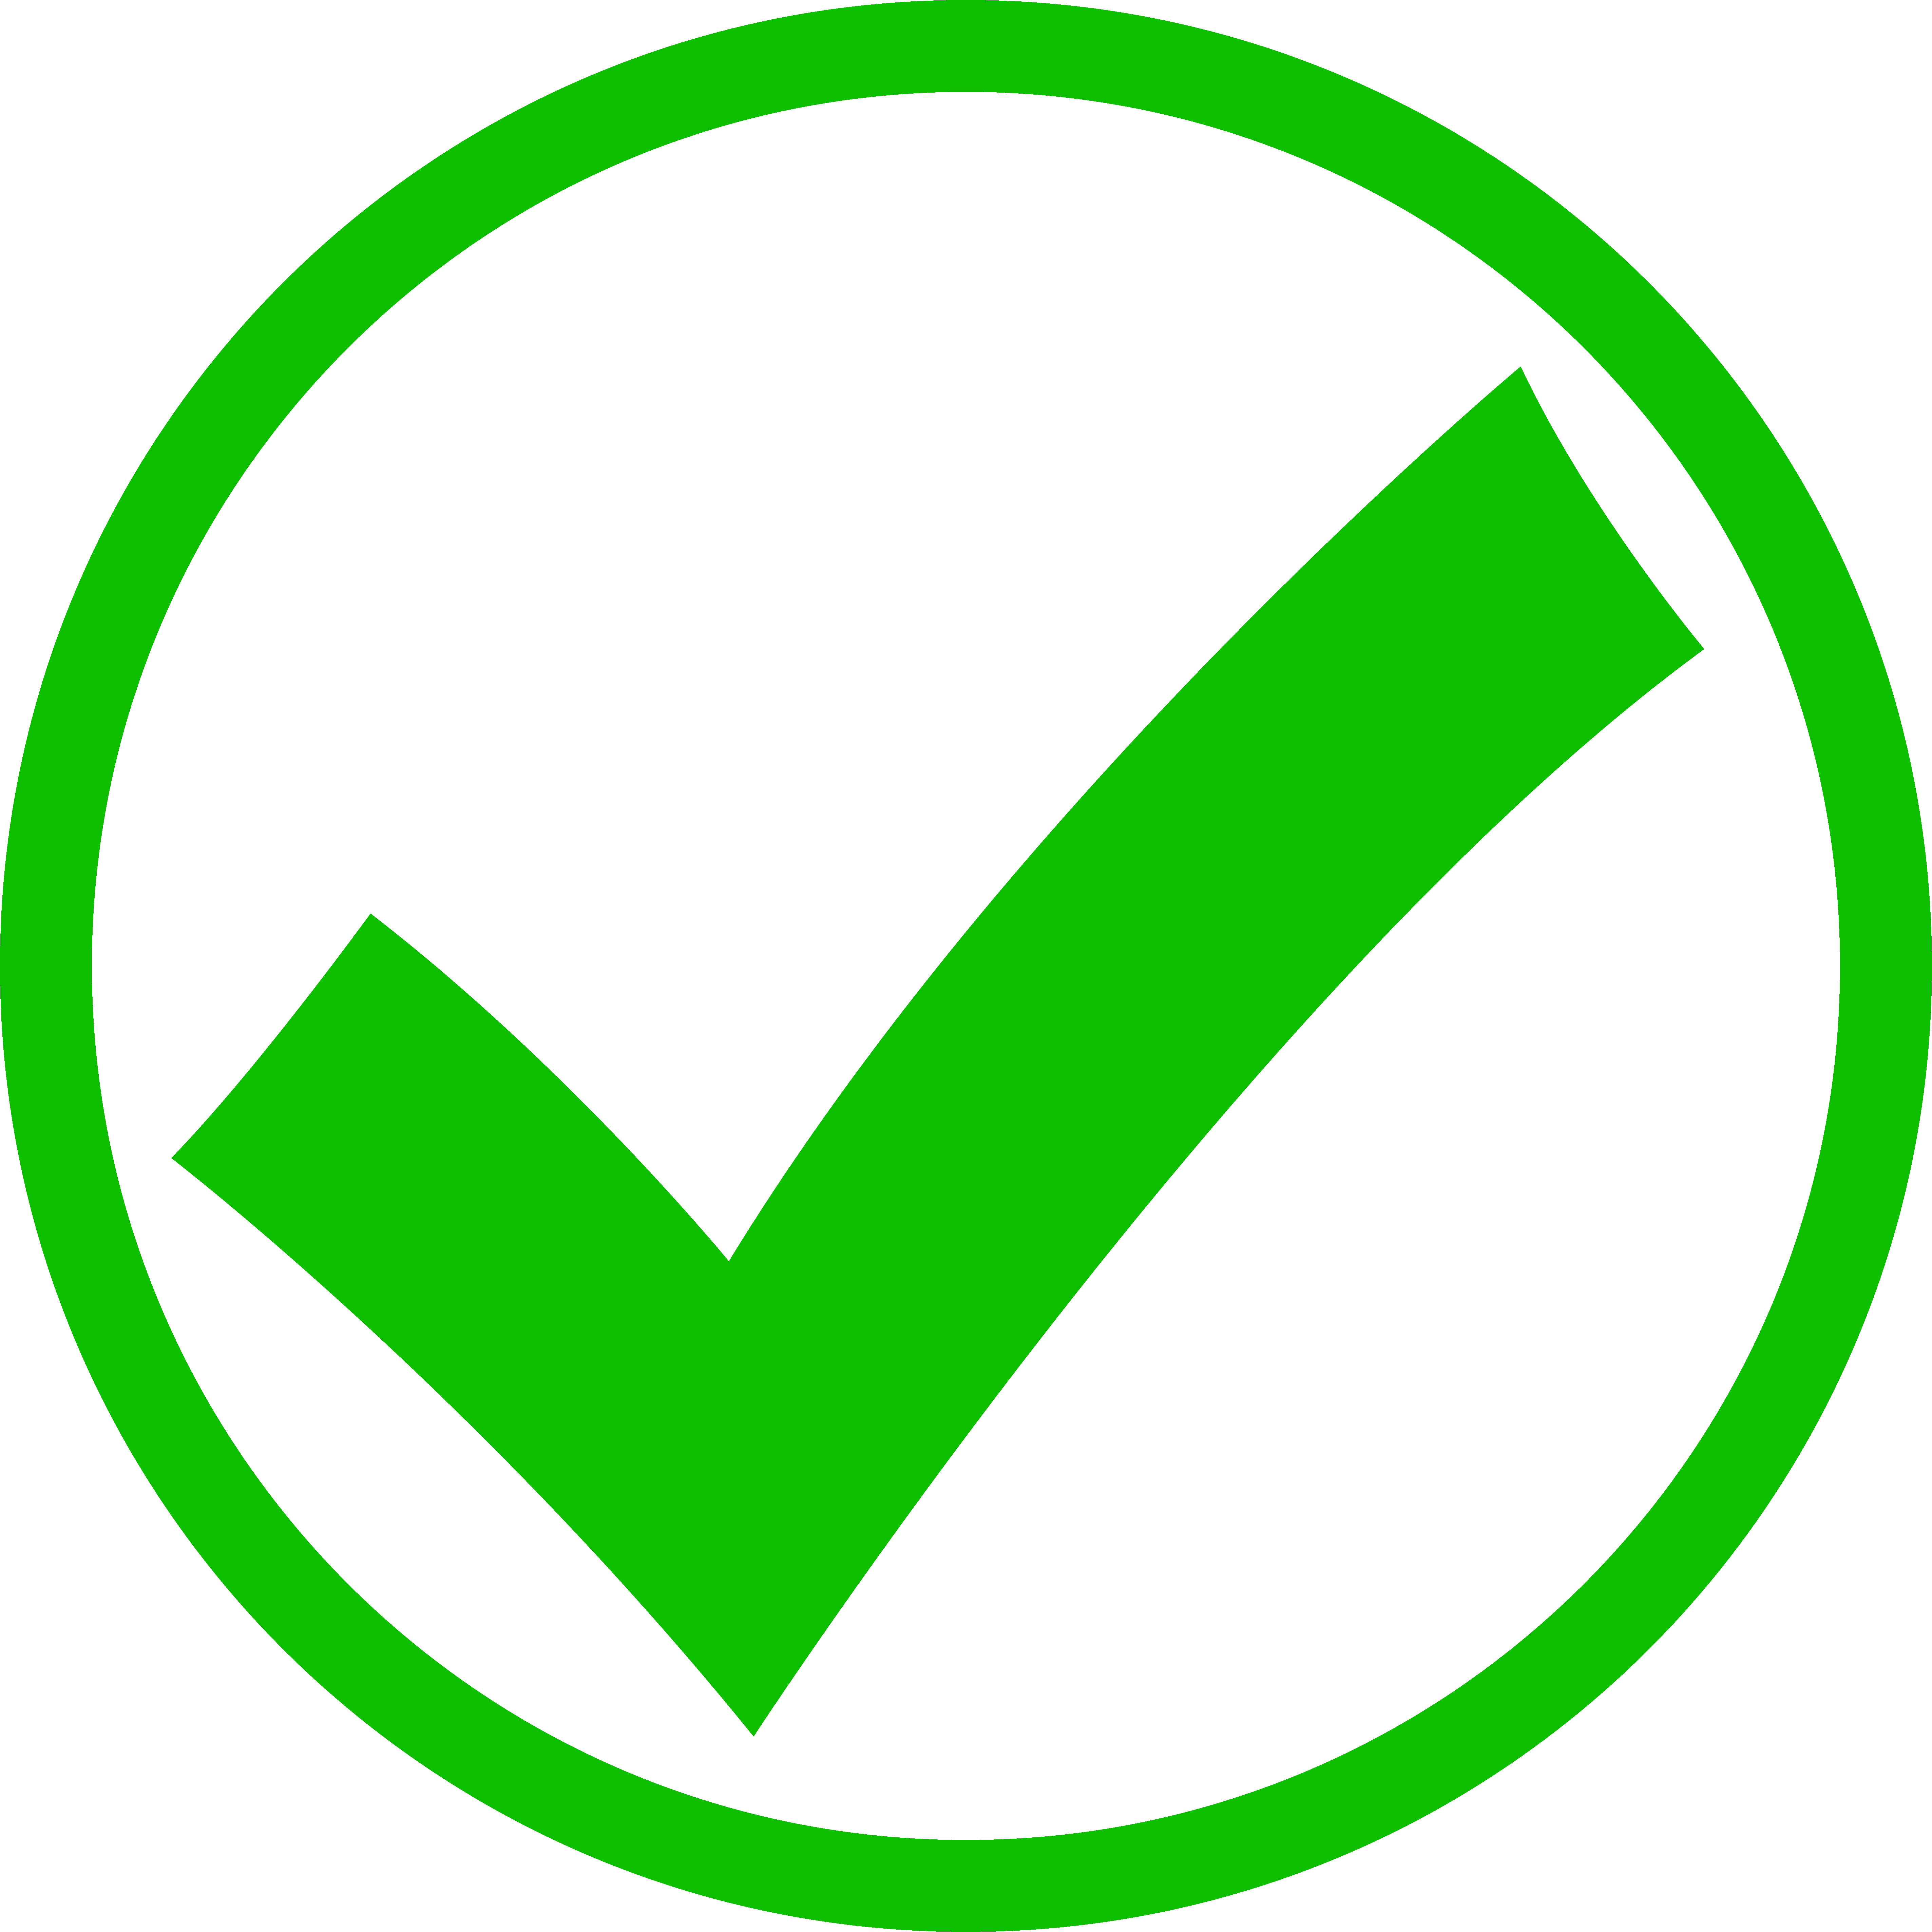 The girls right check. Checkmark clipart green